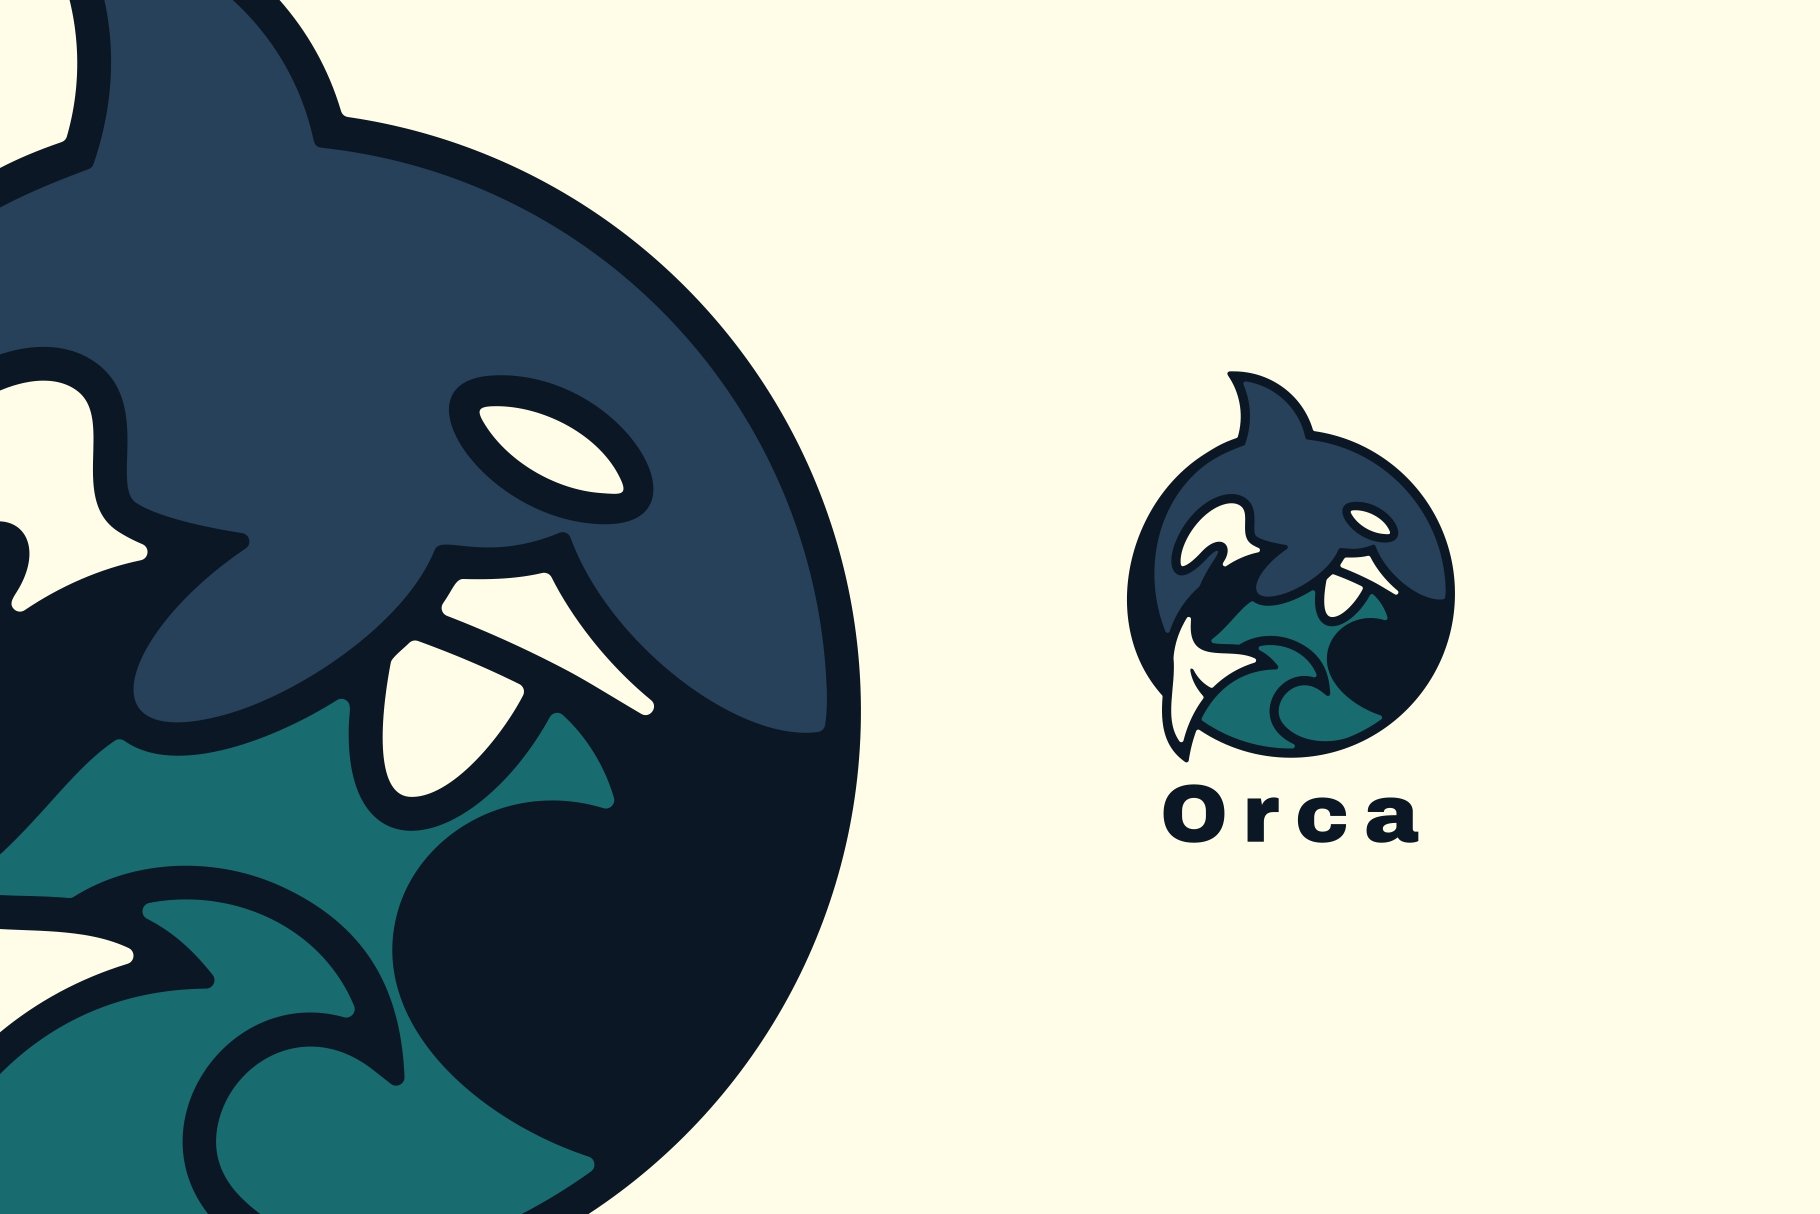 Killer Whale Simple Logo cover image.